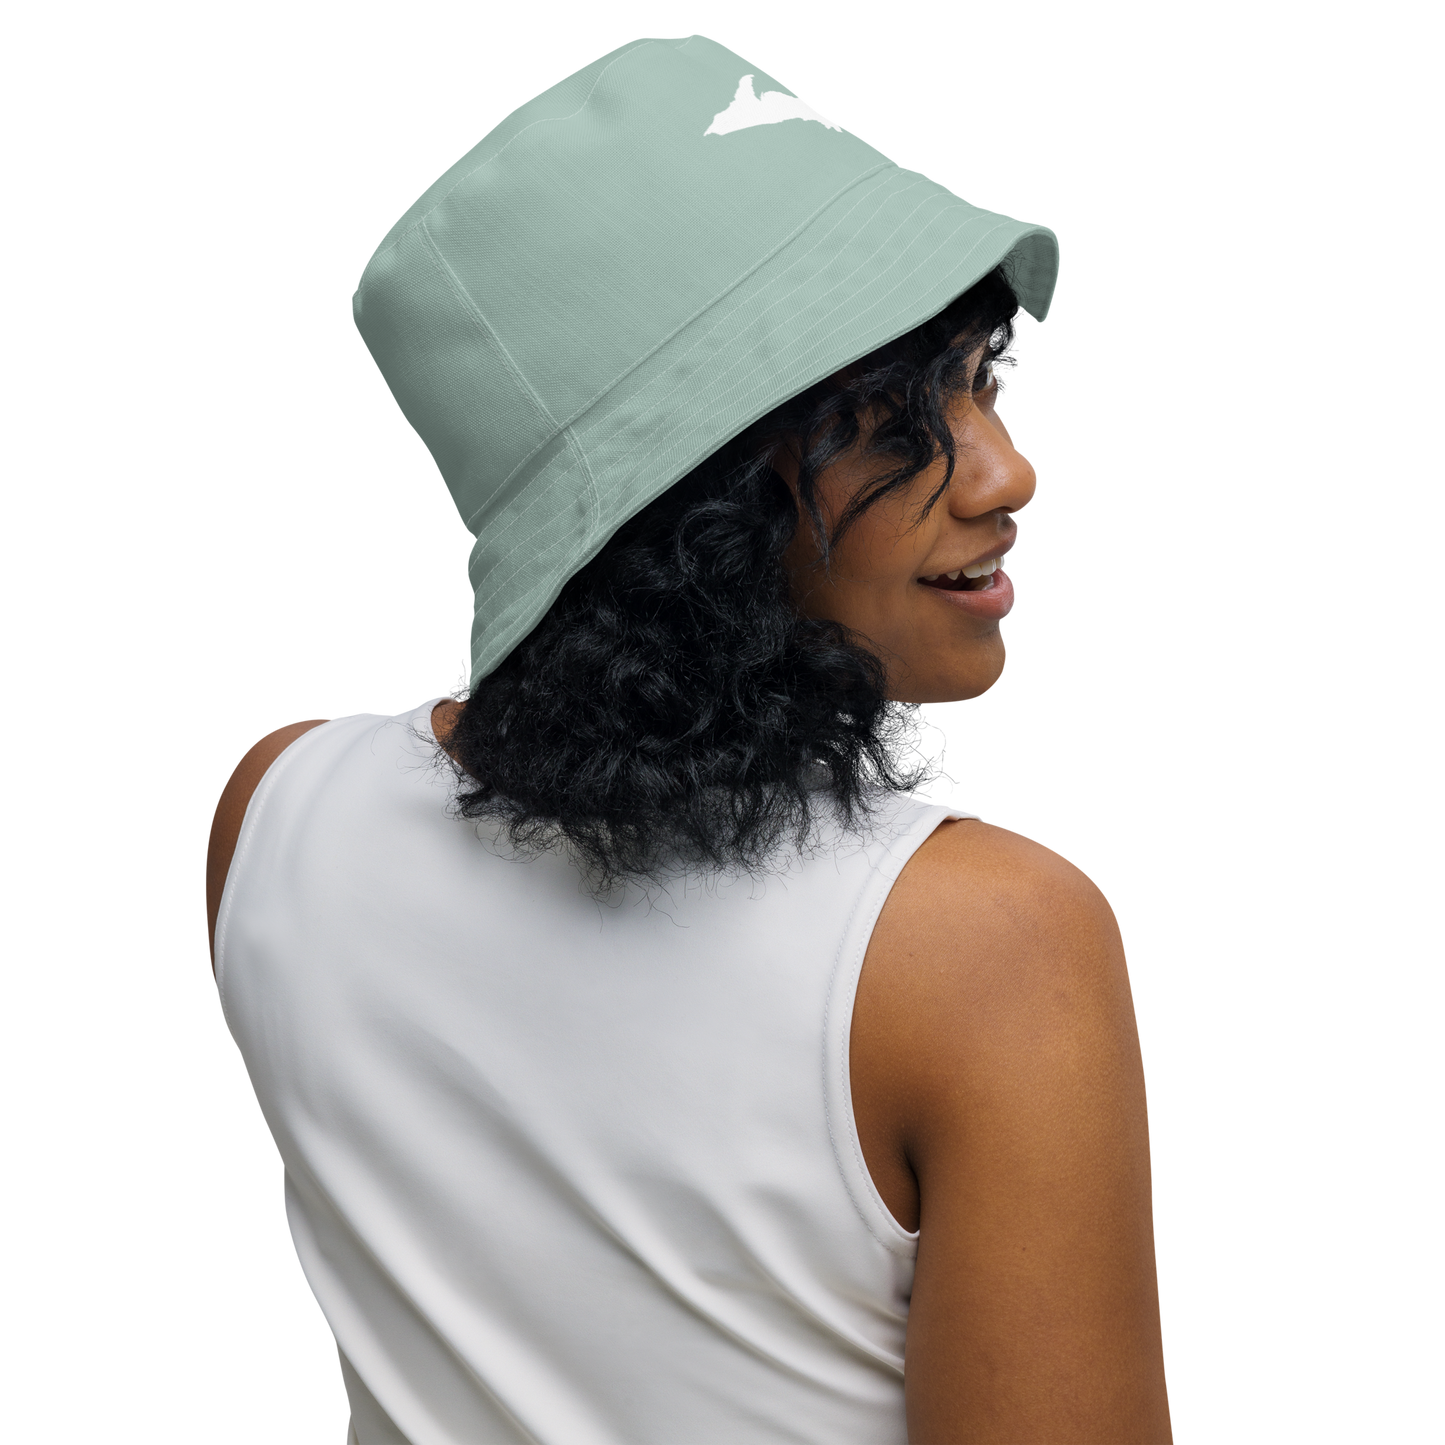 Michigan Upper Peninsula Bucket Hat (w/ UP Outline) | Reversible - Opal Color